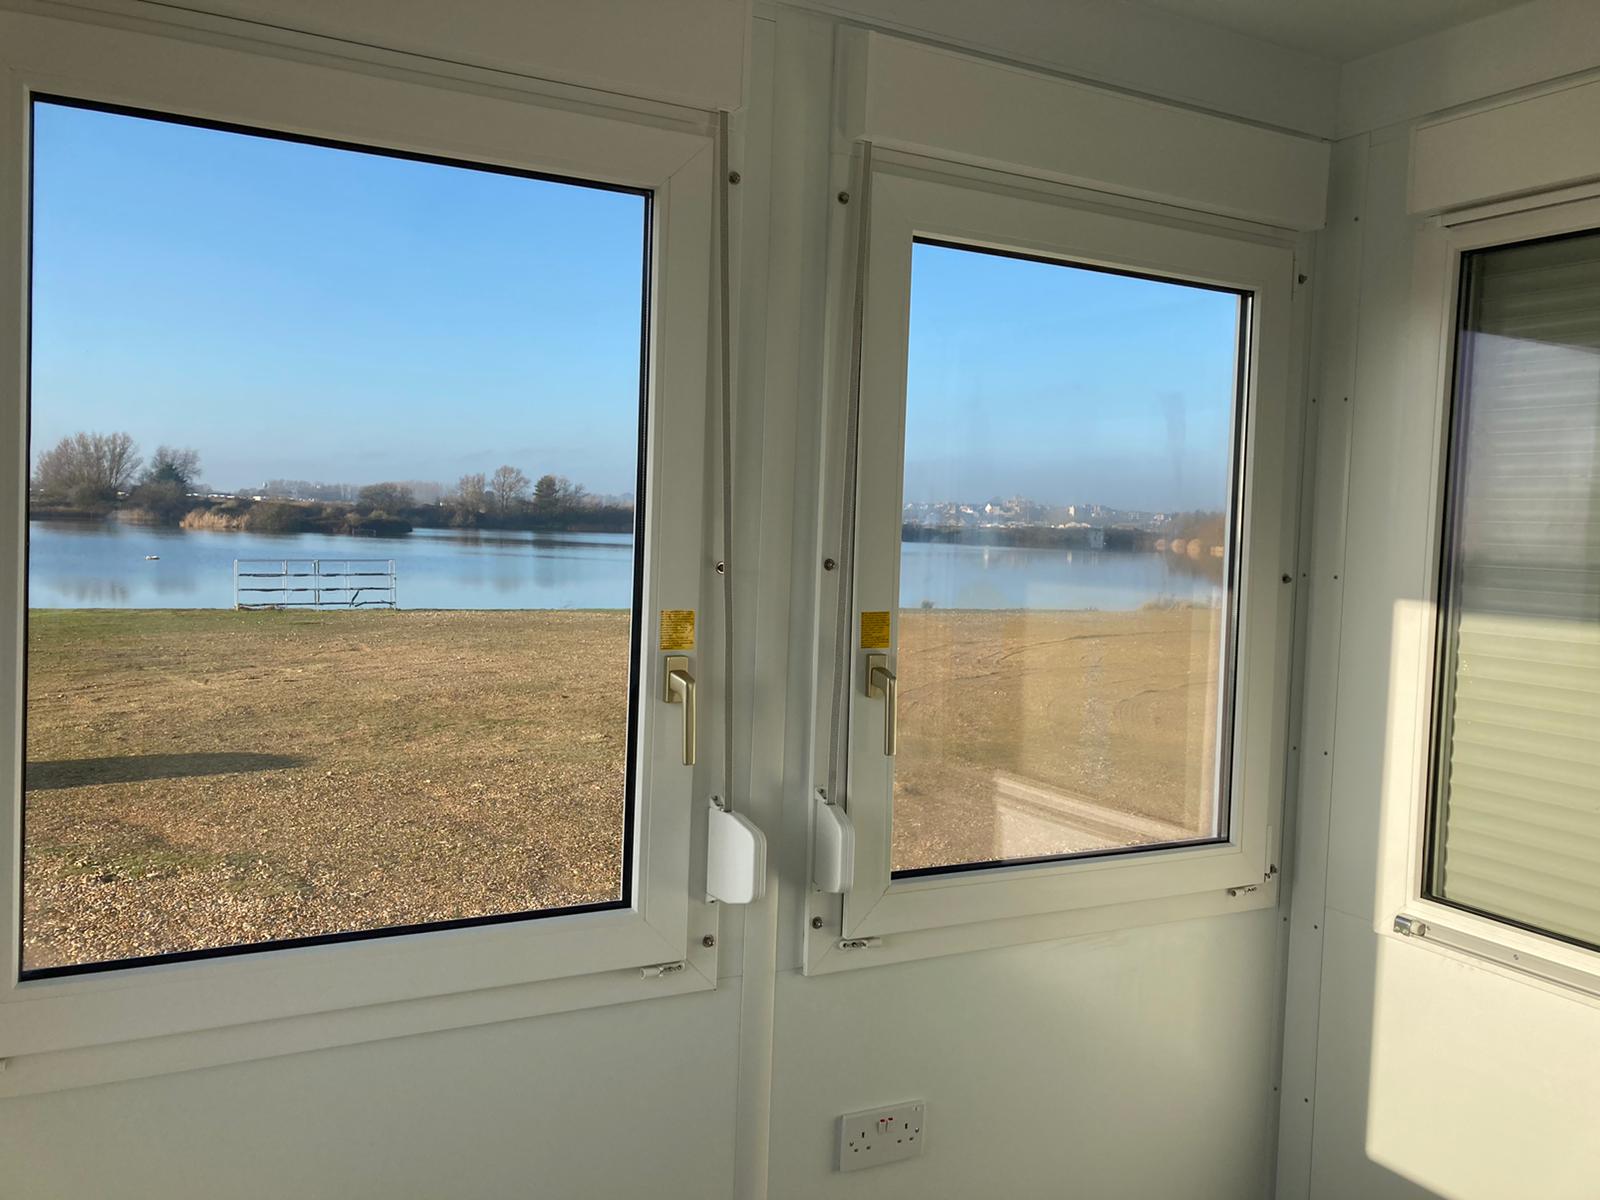 New Office With Lake View